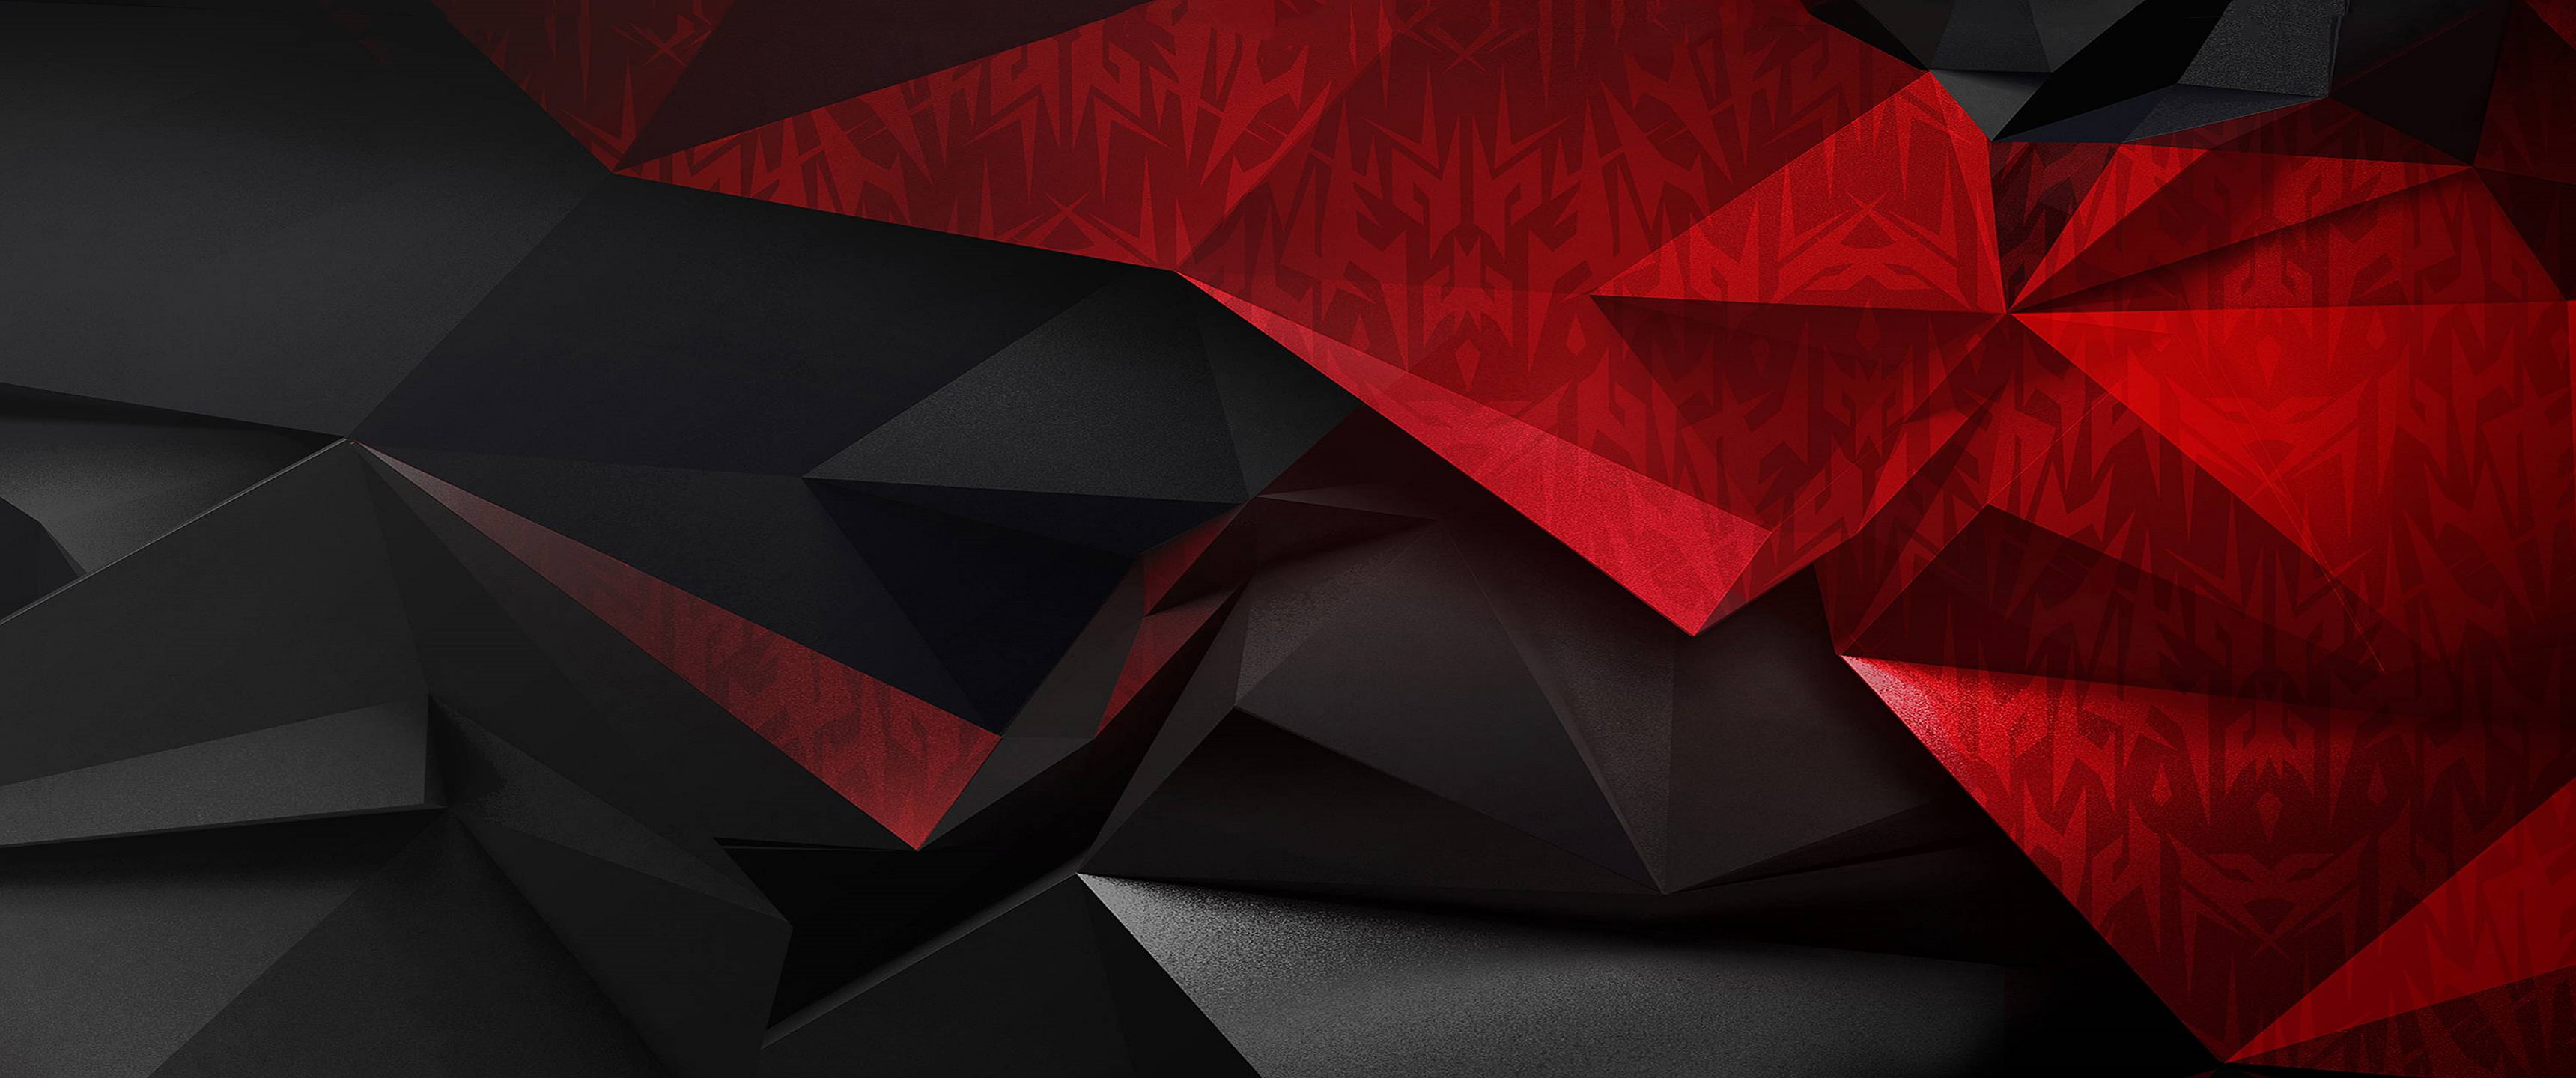 Black And Red Abstract Background - 3440x1440 Wallpaper 